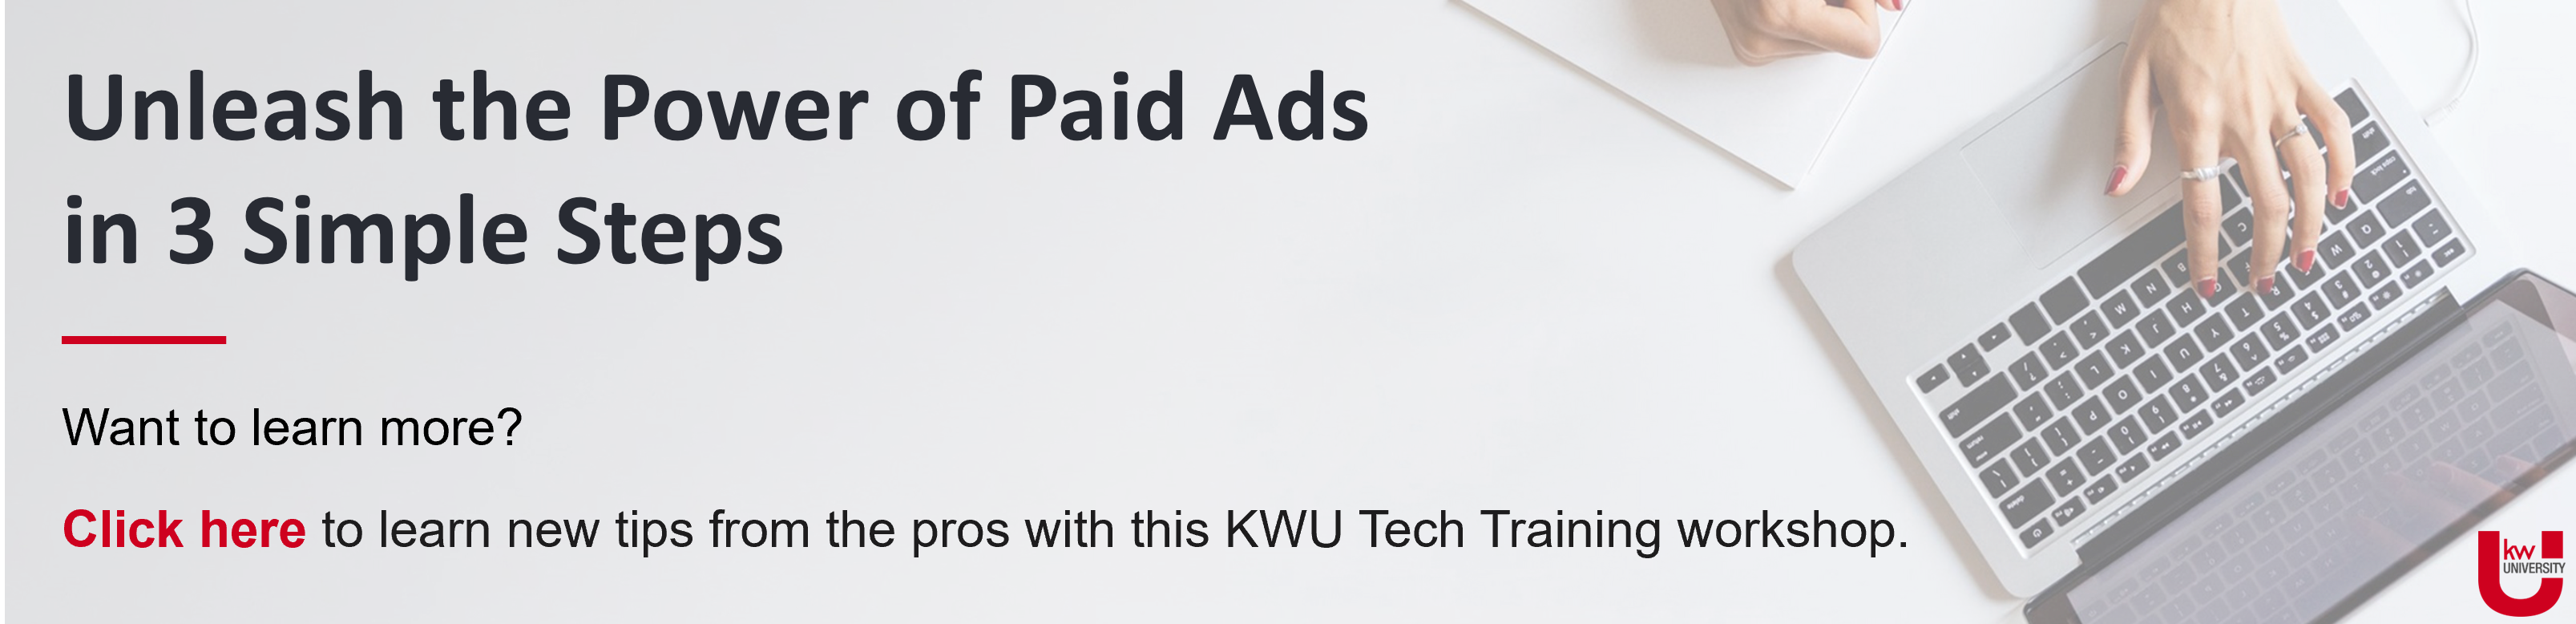 enablement paid ads banner.png